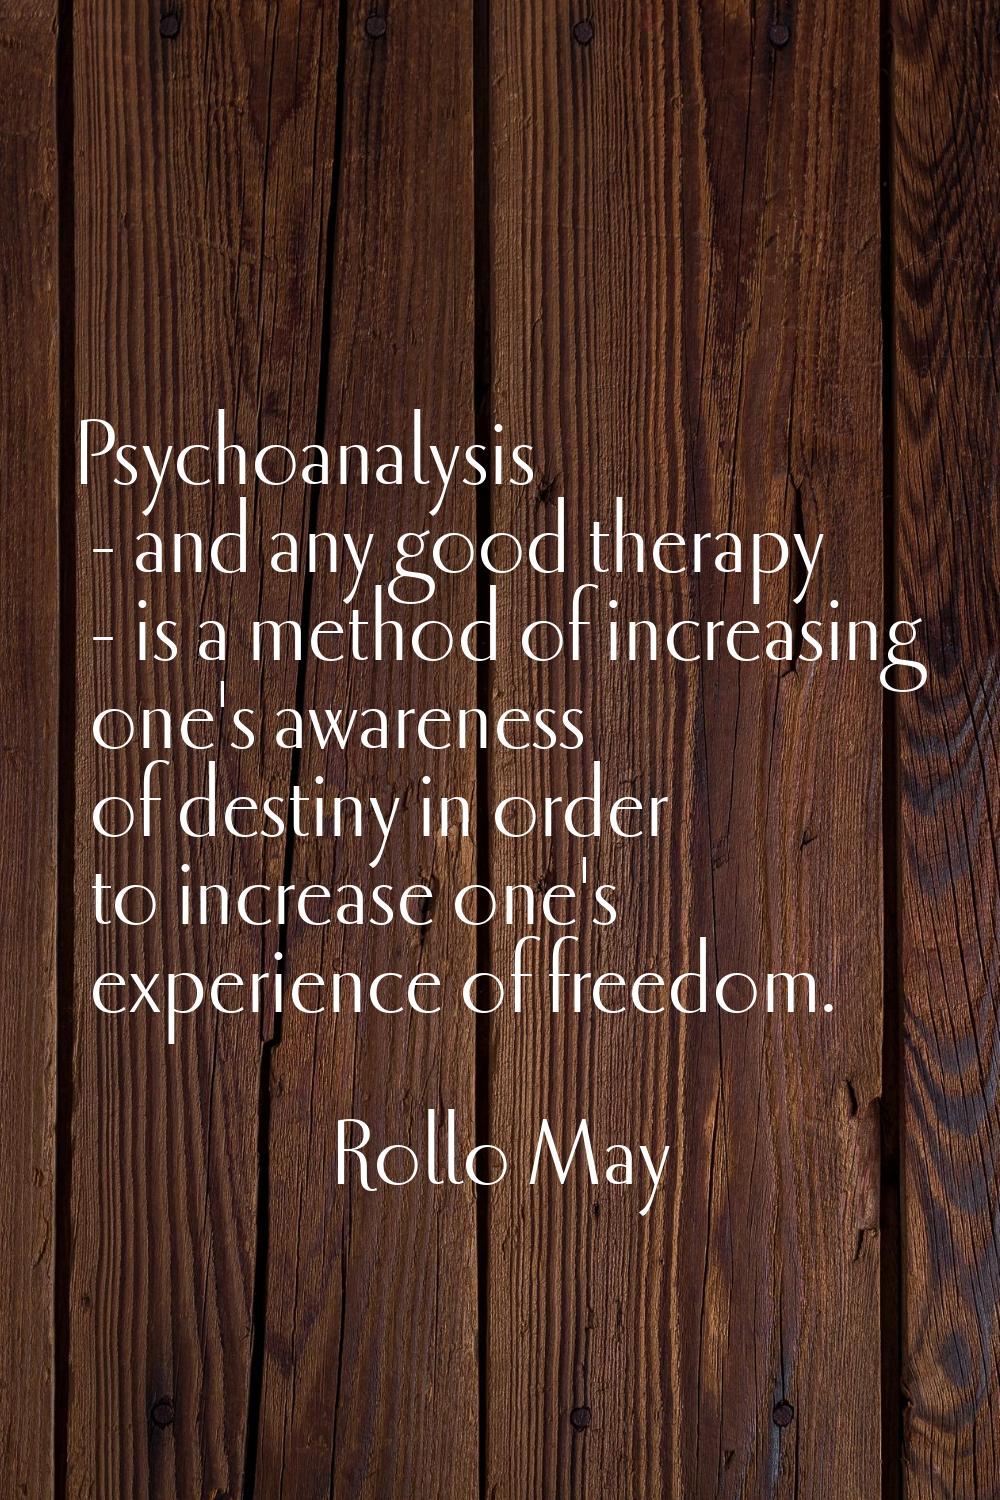 Psychoanalysis - and any good therapy - is a method of increasing one's awareness of destiny in ord